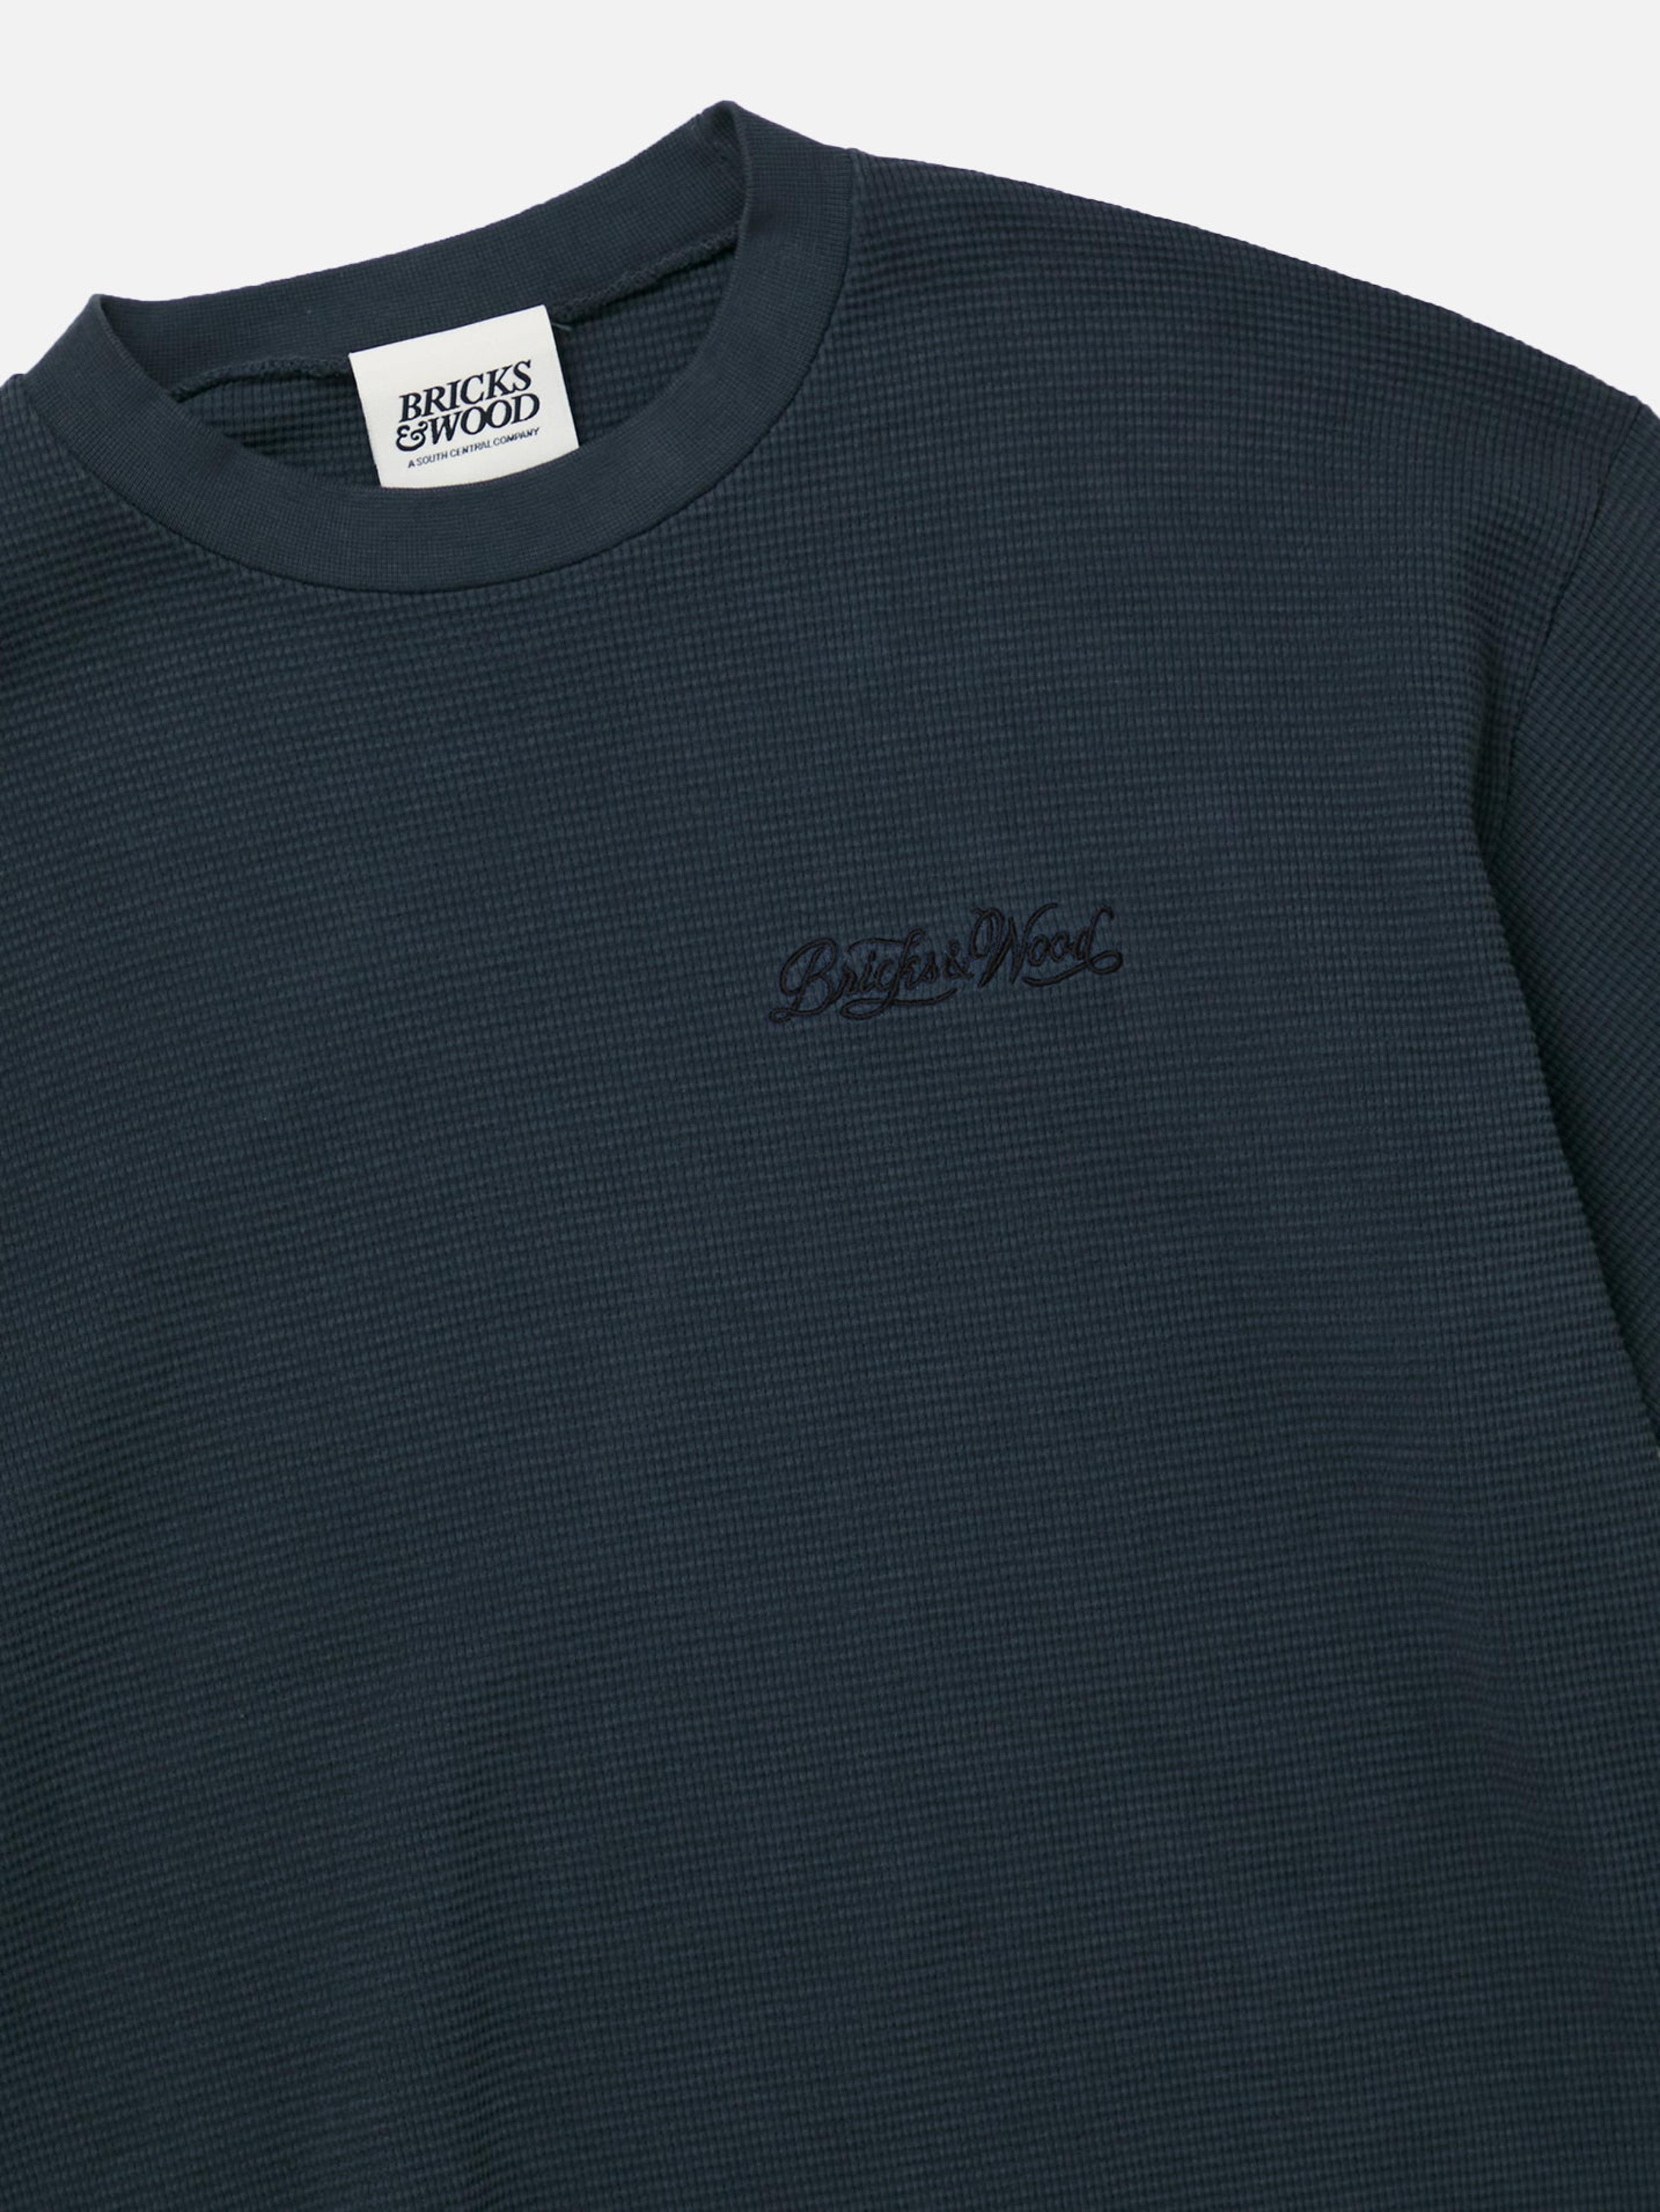 Alternate View 1 of Script Logo Waffle Thermal - Midnight